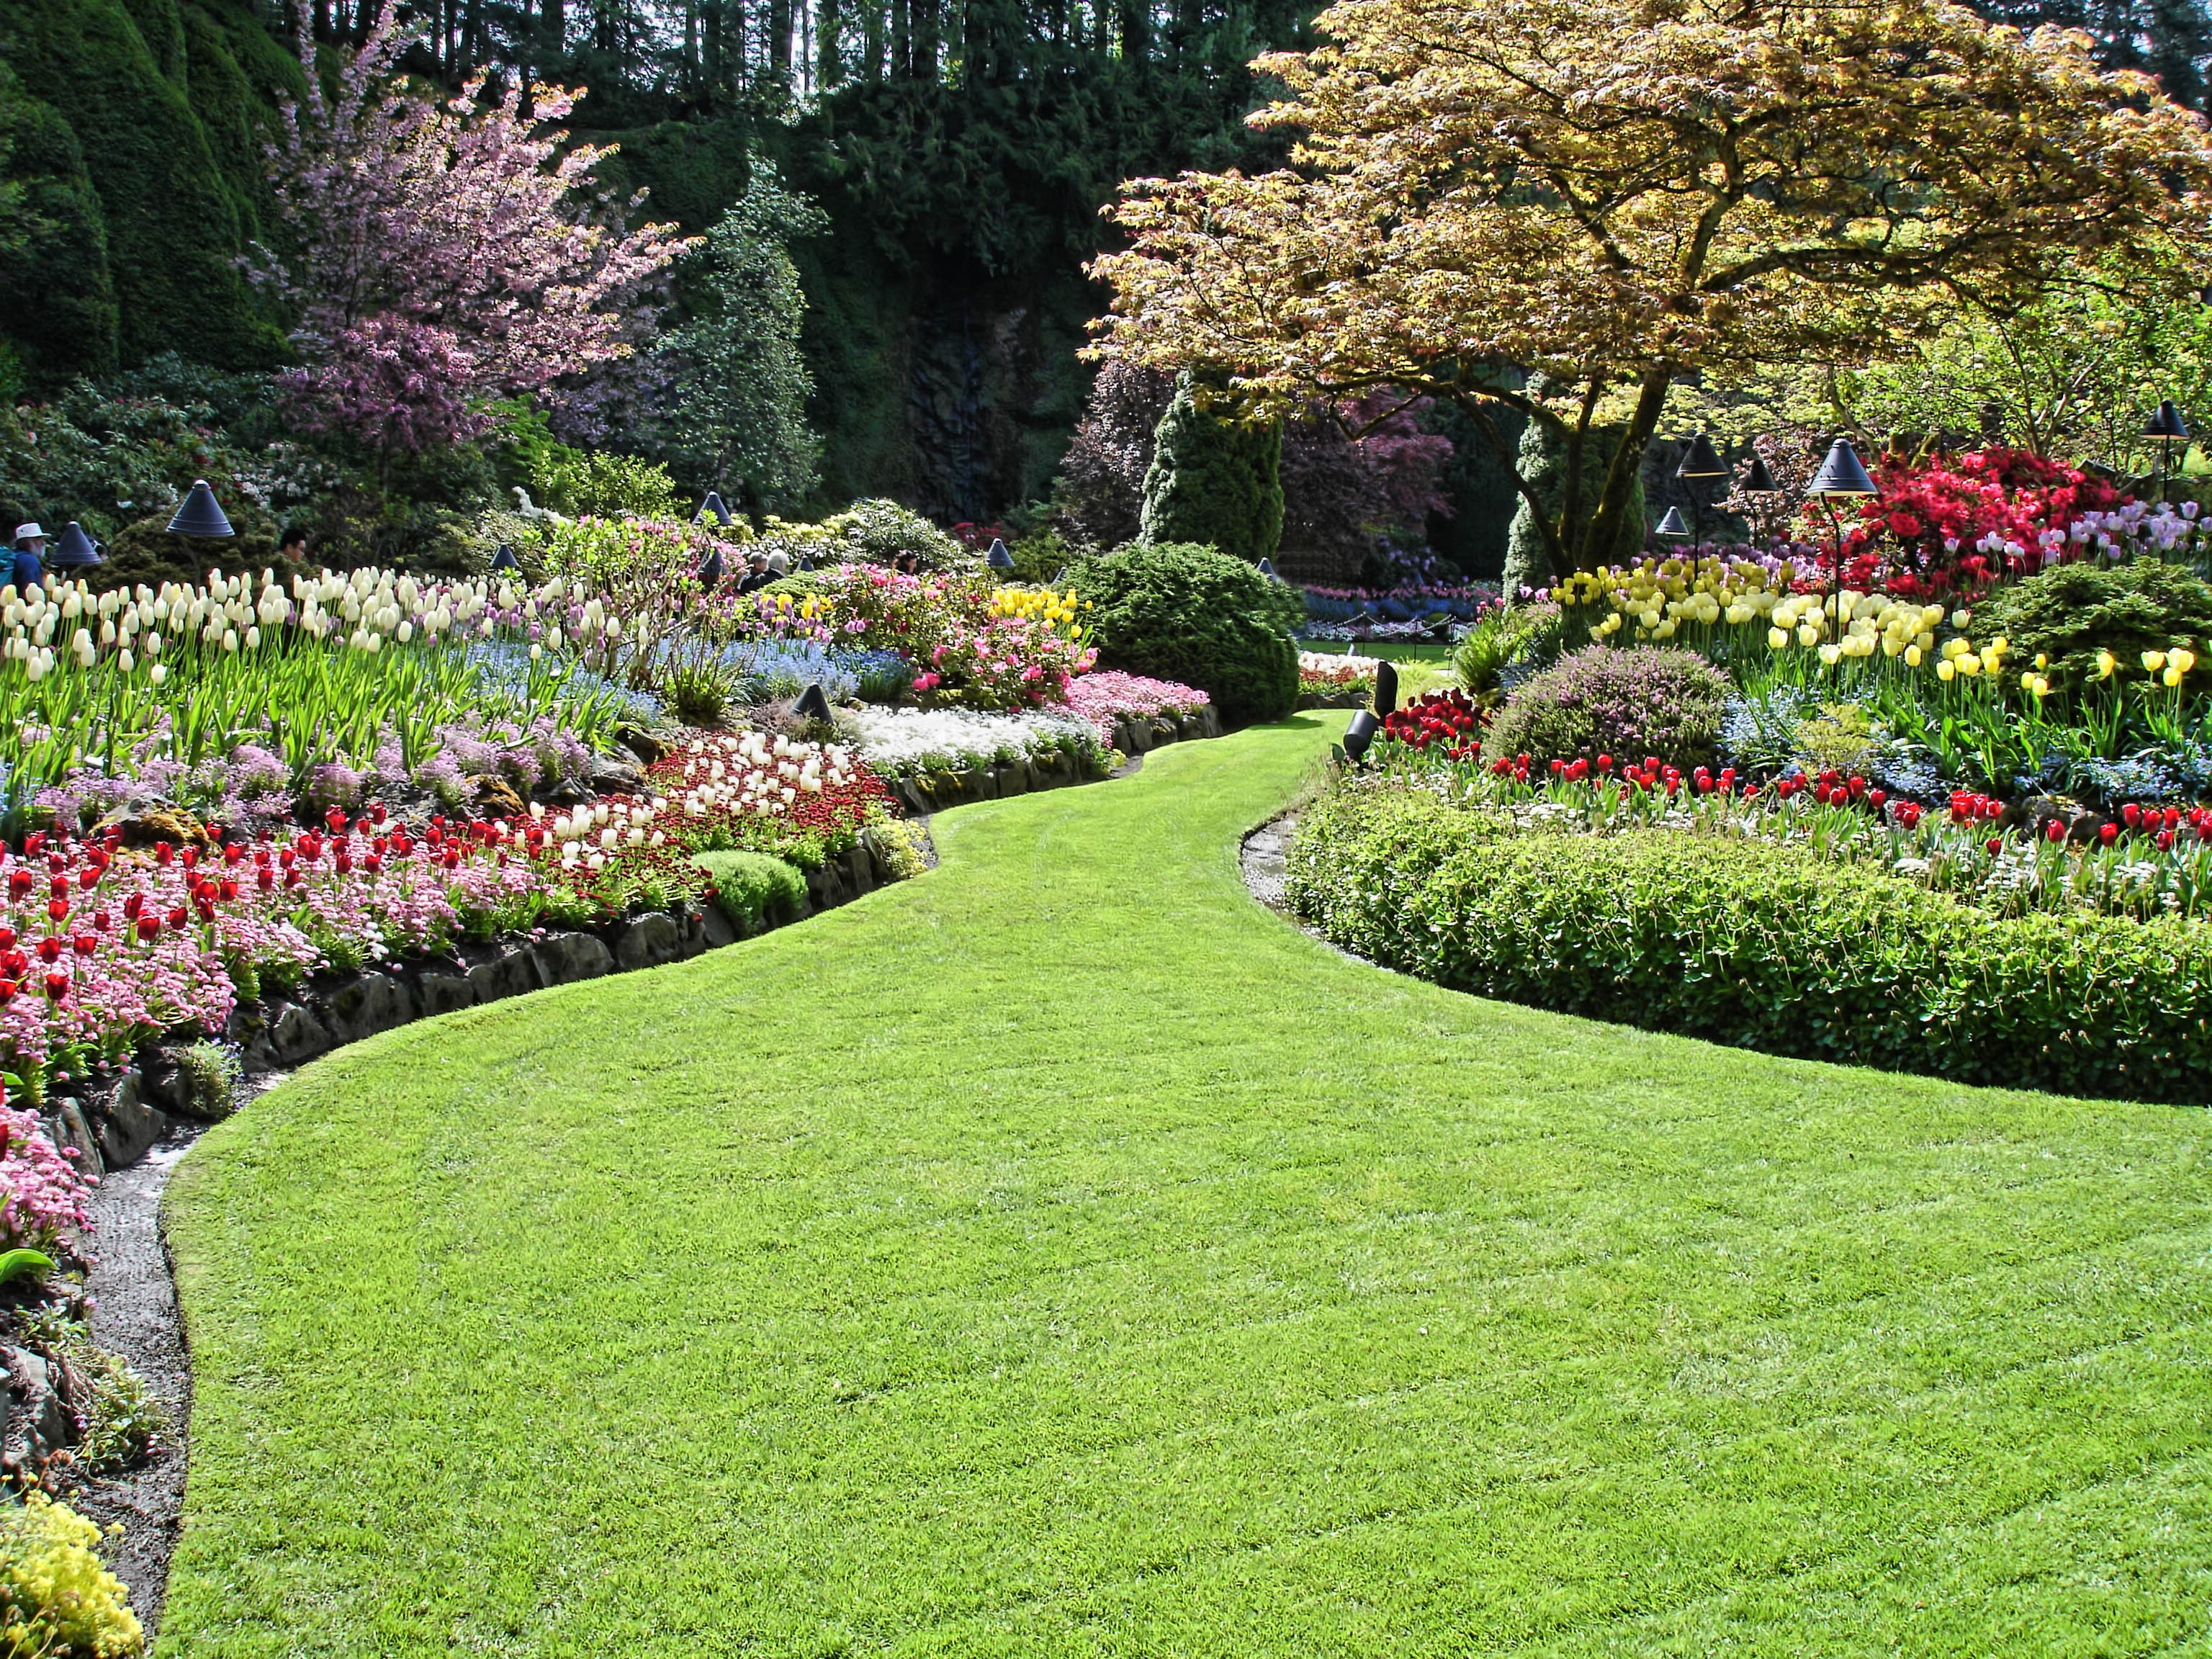 Landscaping Ideas for your Home Garden